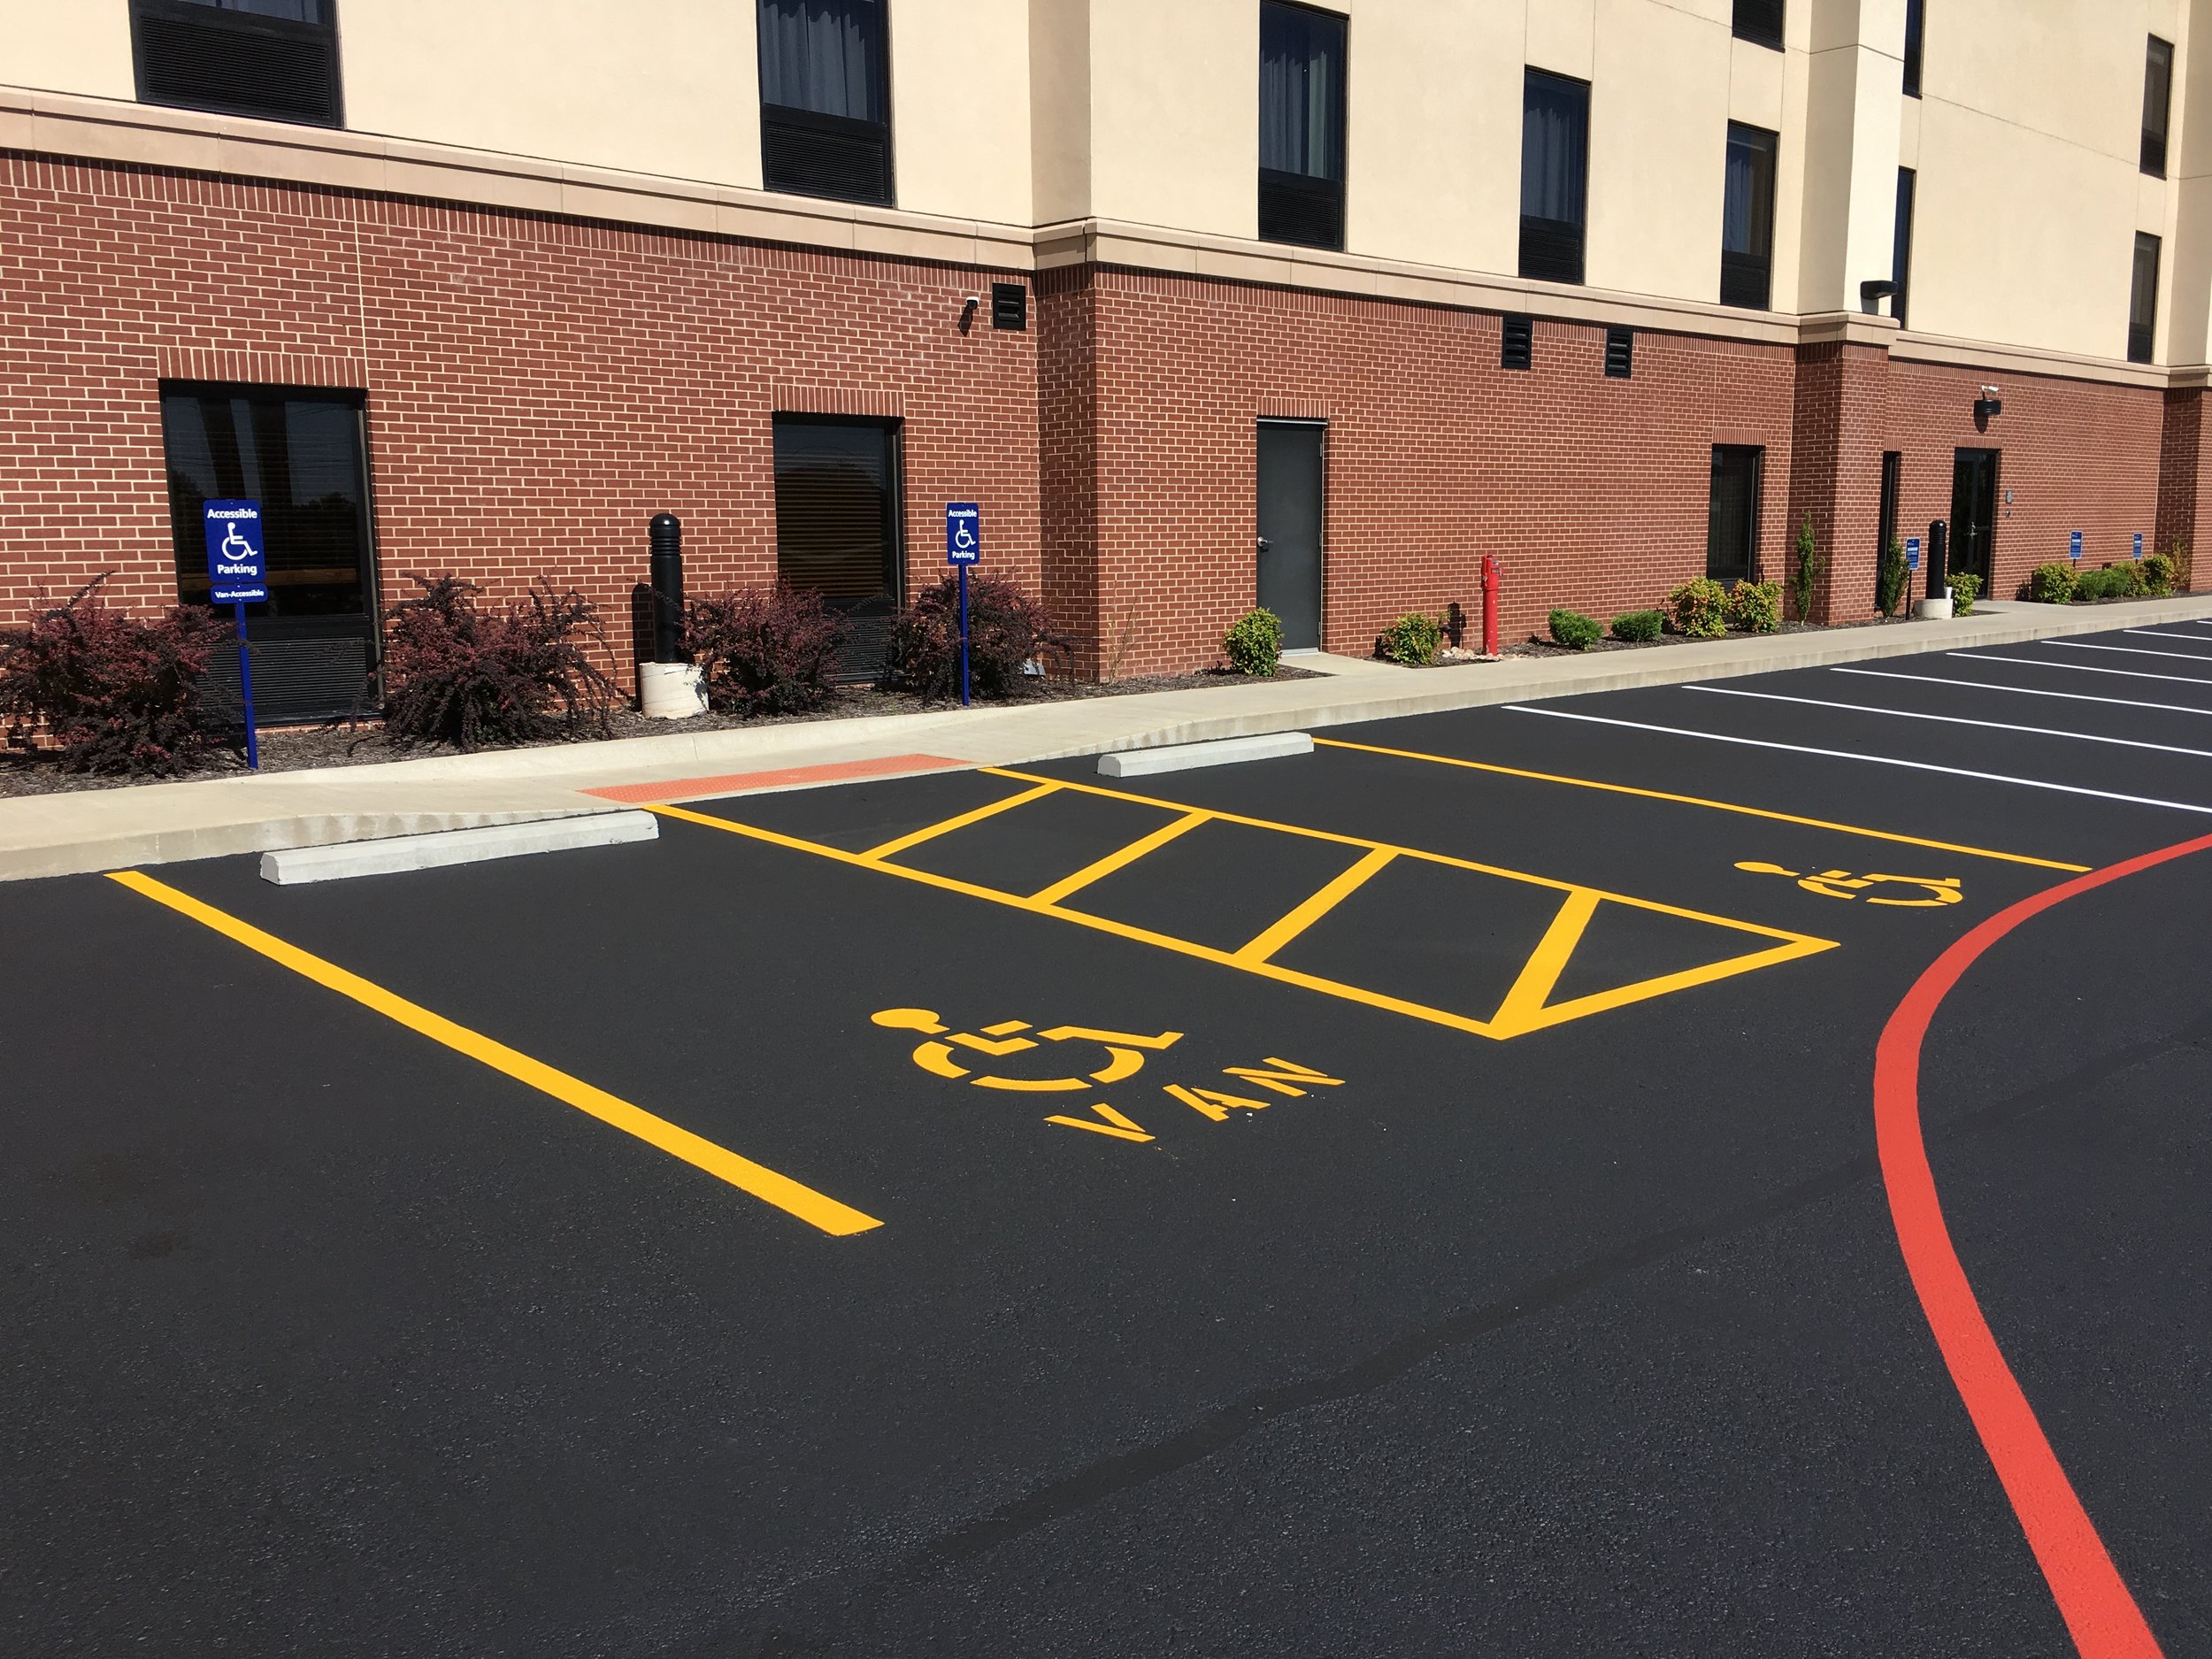 Newly completed parking lot by Springfield Striping and Sealing. The lot includes multiple handicap-accessible spaces marked with yellow lines &amp; symbols complemented by blue signage.